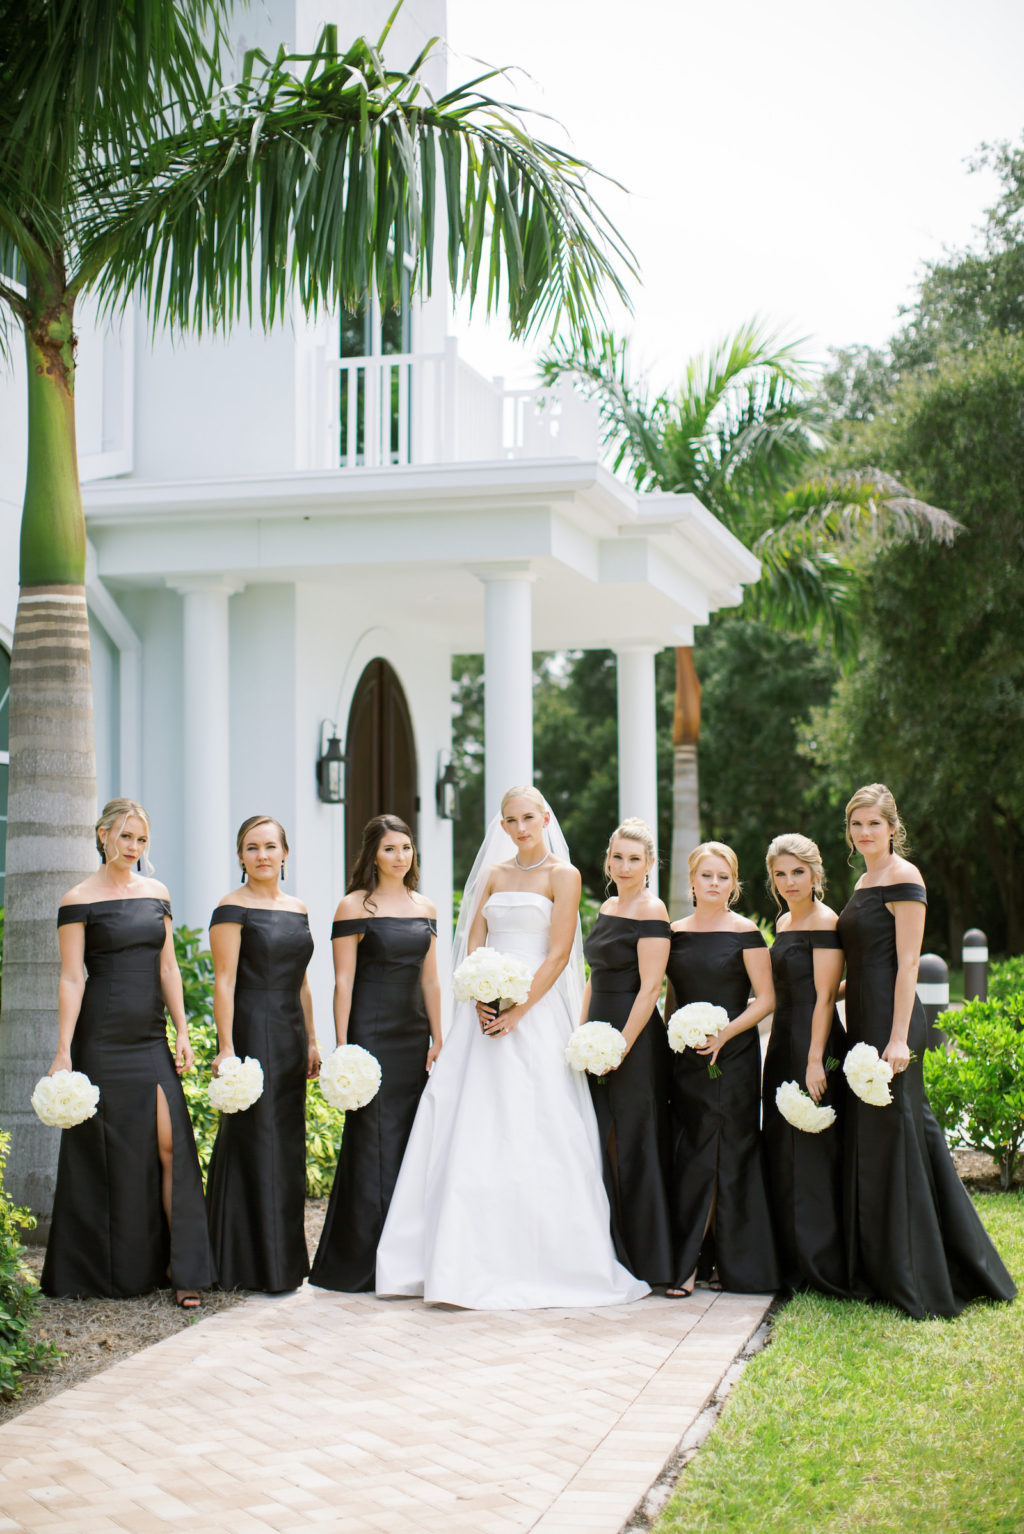 Classic Tampa Bride with Bridesmaids in Matching Off the Shoulder Dresses Holding White Floral Bouquets | Safety Harbor Traditional Church Wedding Venue Harborside Chapel